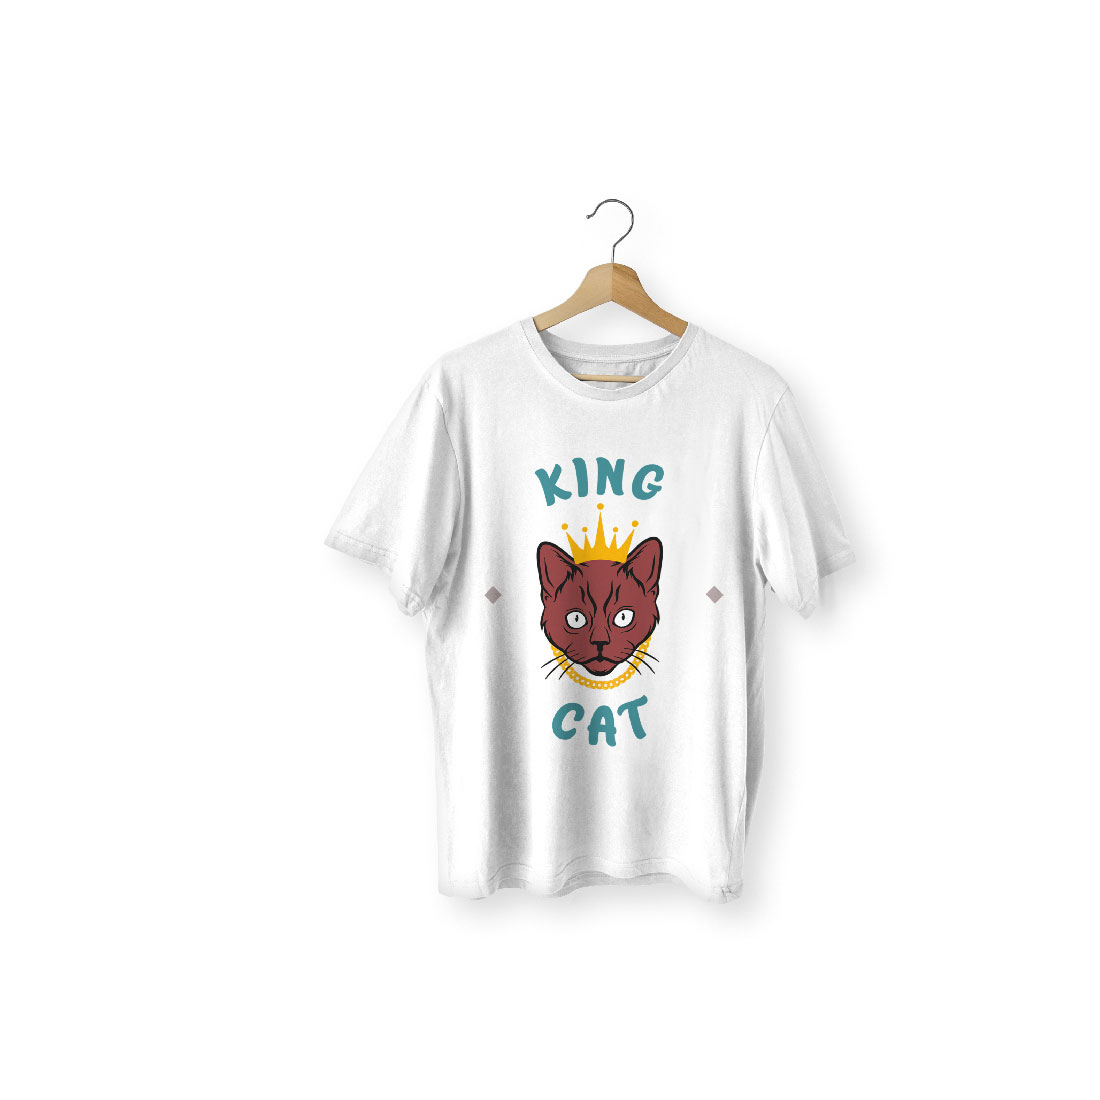 5 Vintage T-Shirt's Design Collection in Just $20, king cat on white design.